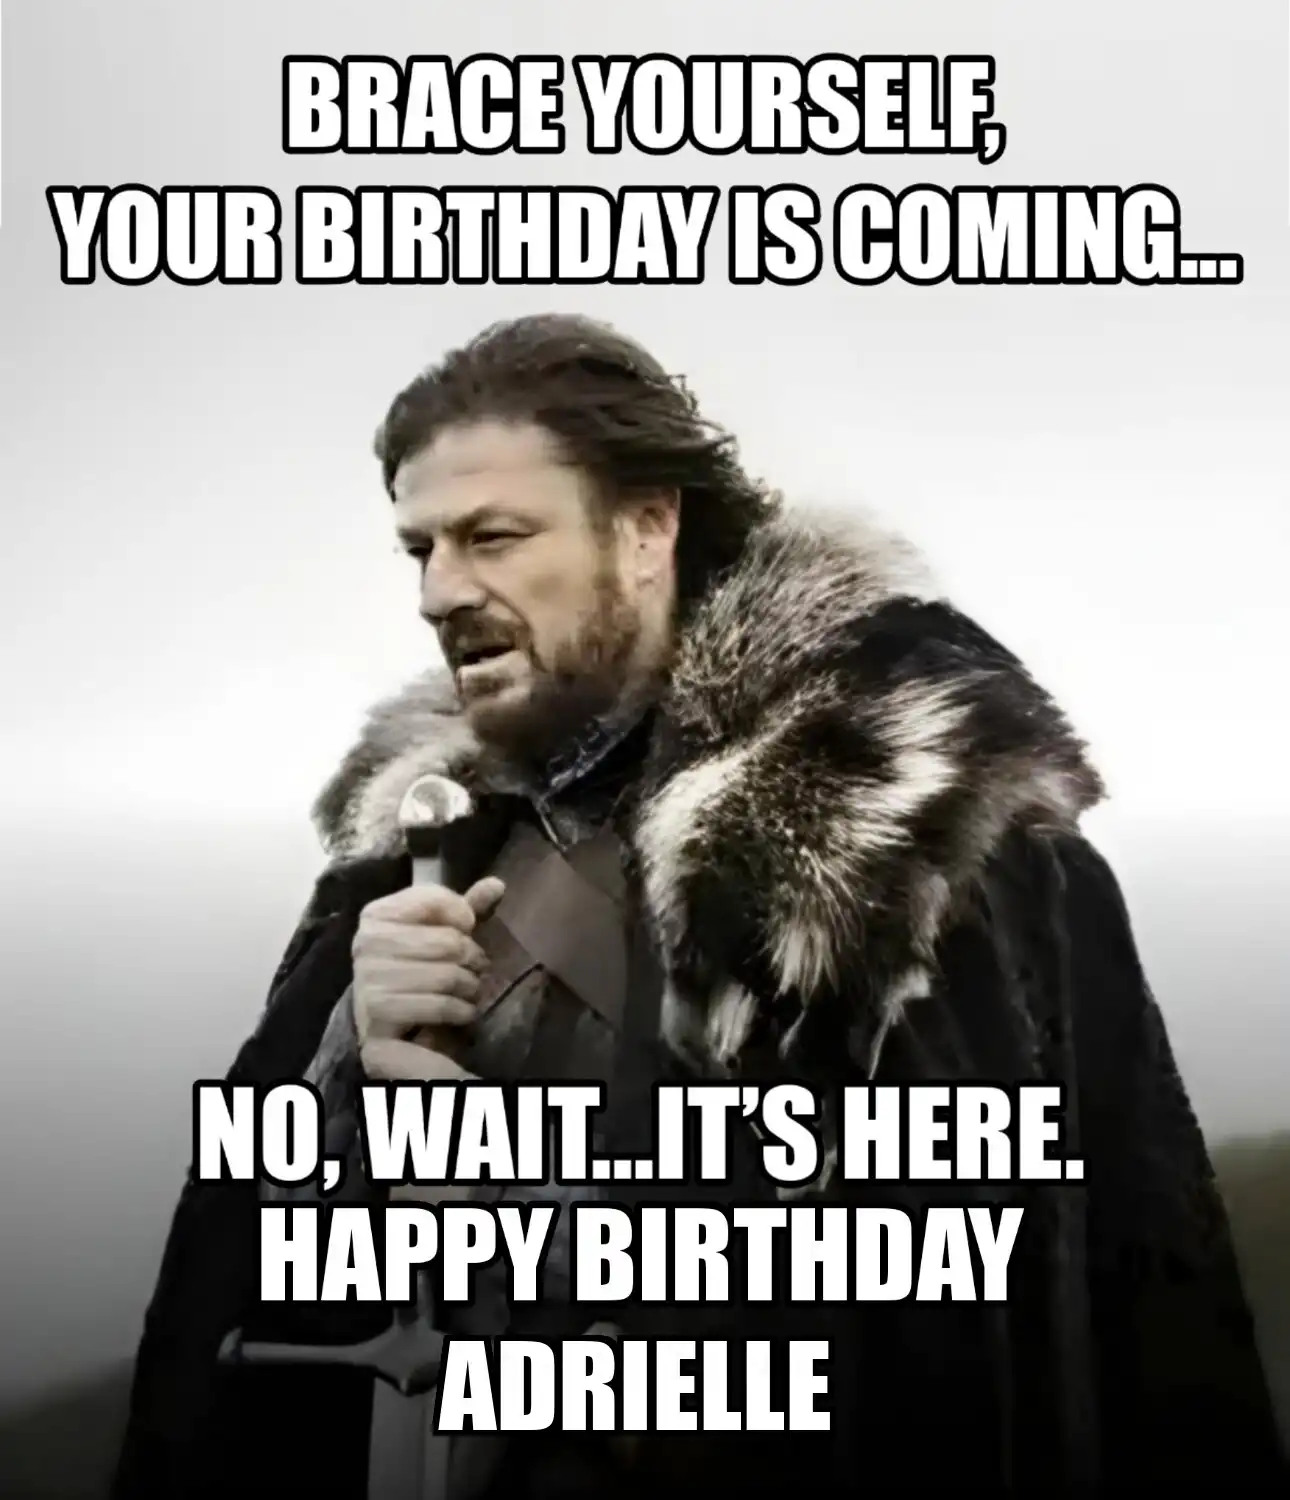 Happy Birthday Adrielle Brace Yourself Your Birthday Is Coming Meme